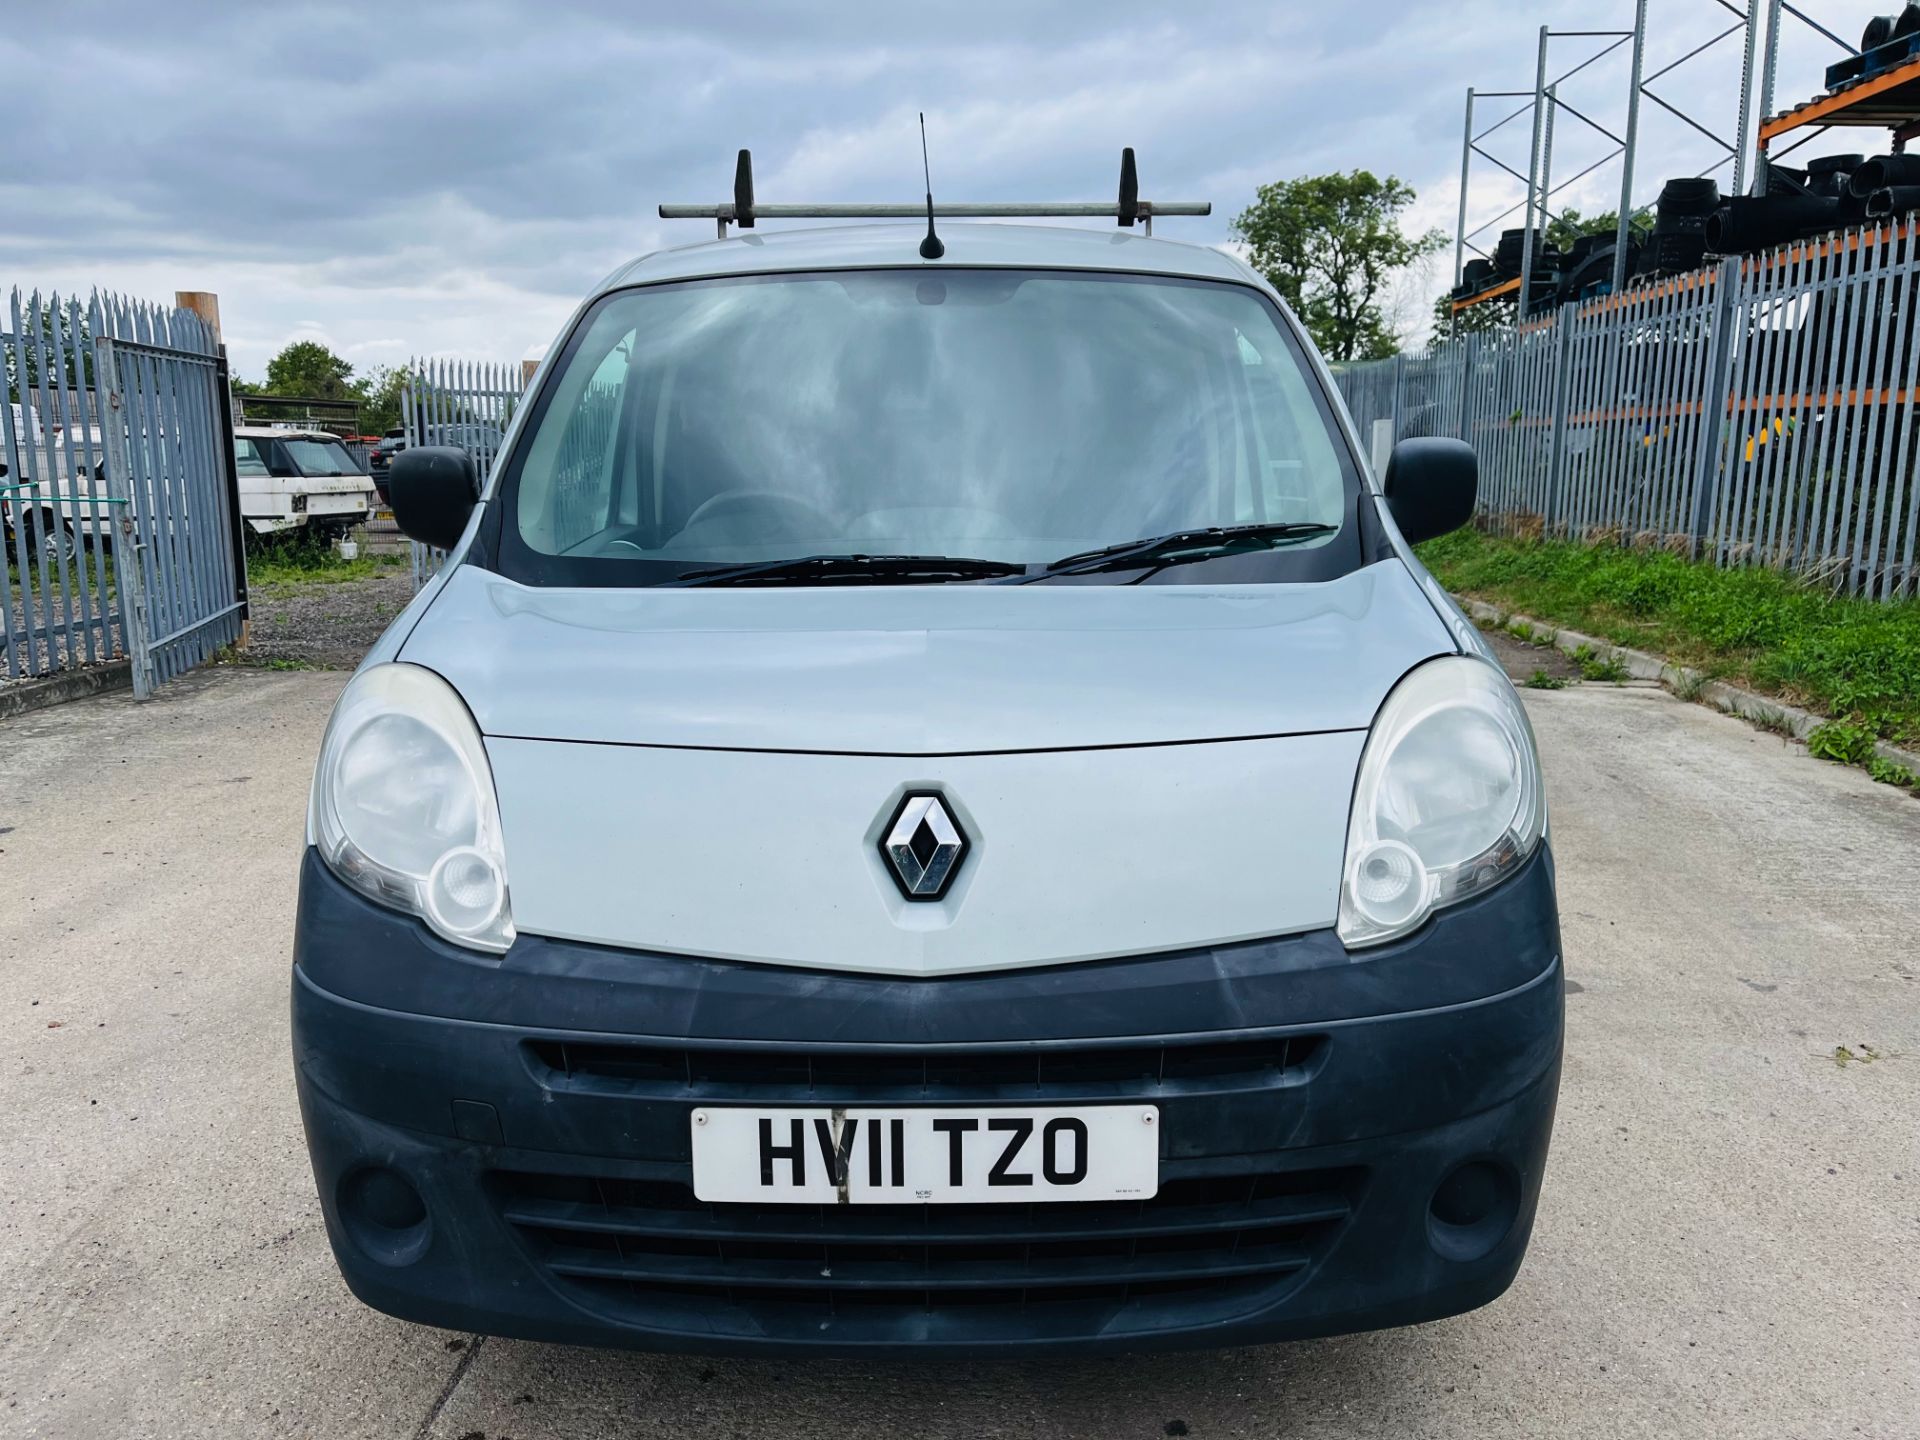 (Reserve Met) Renault Kangoo dci "Maxi Plus" 11reg - Rare and hard to find a Maxi Plus model -No Vat - Image 4 of 18